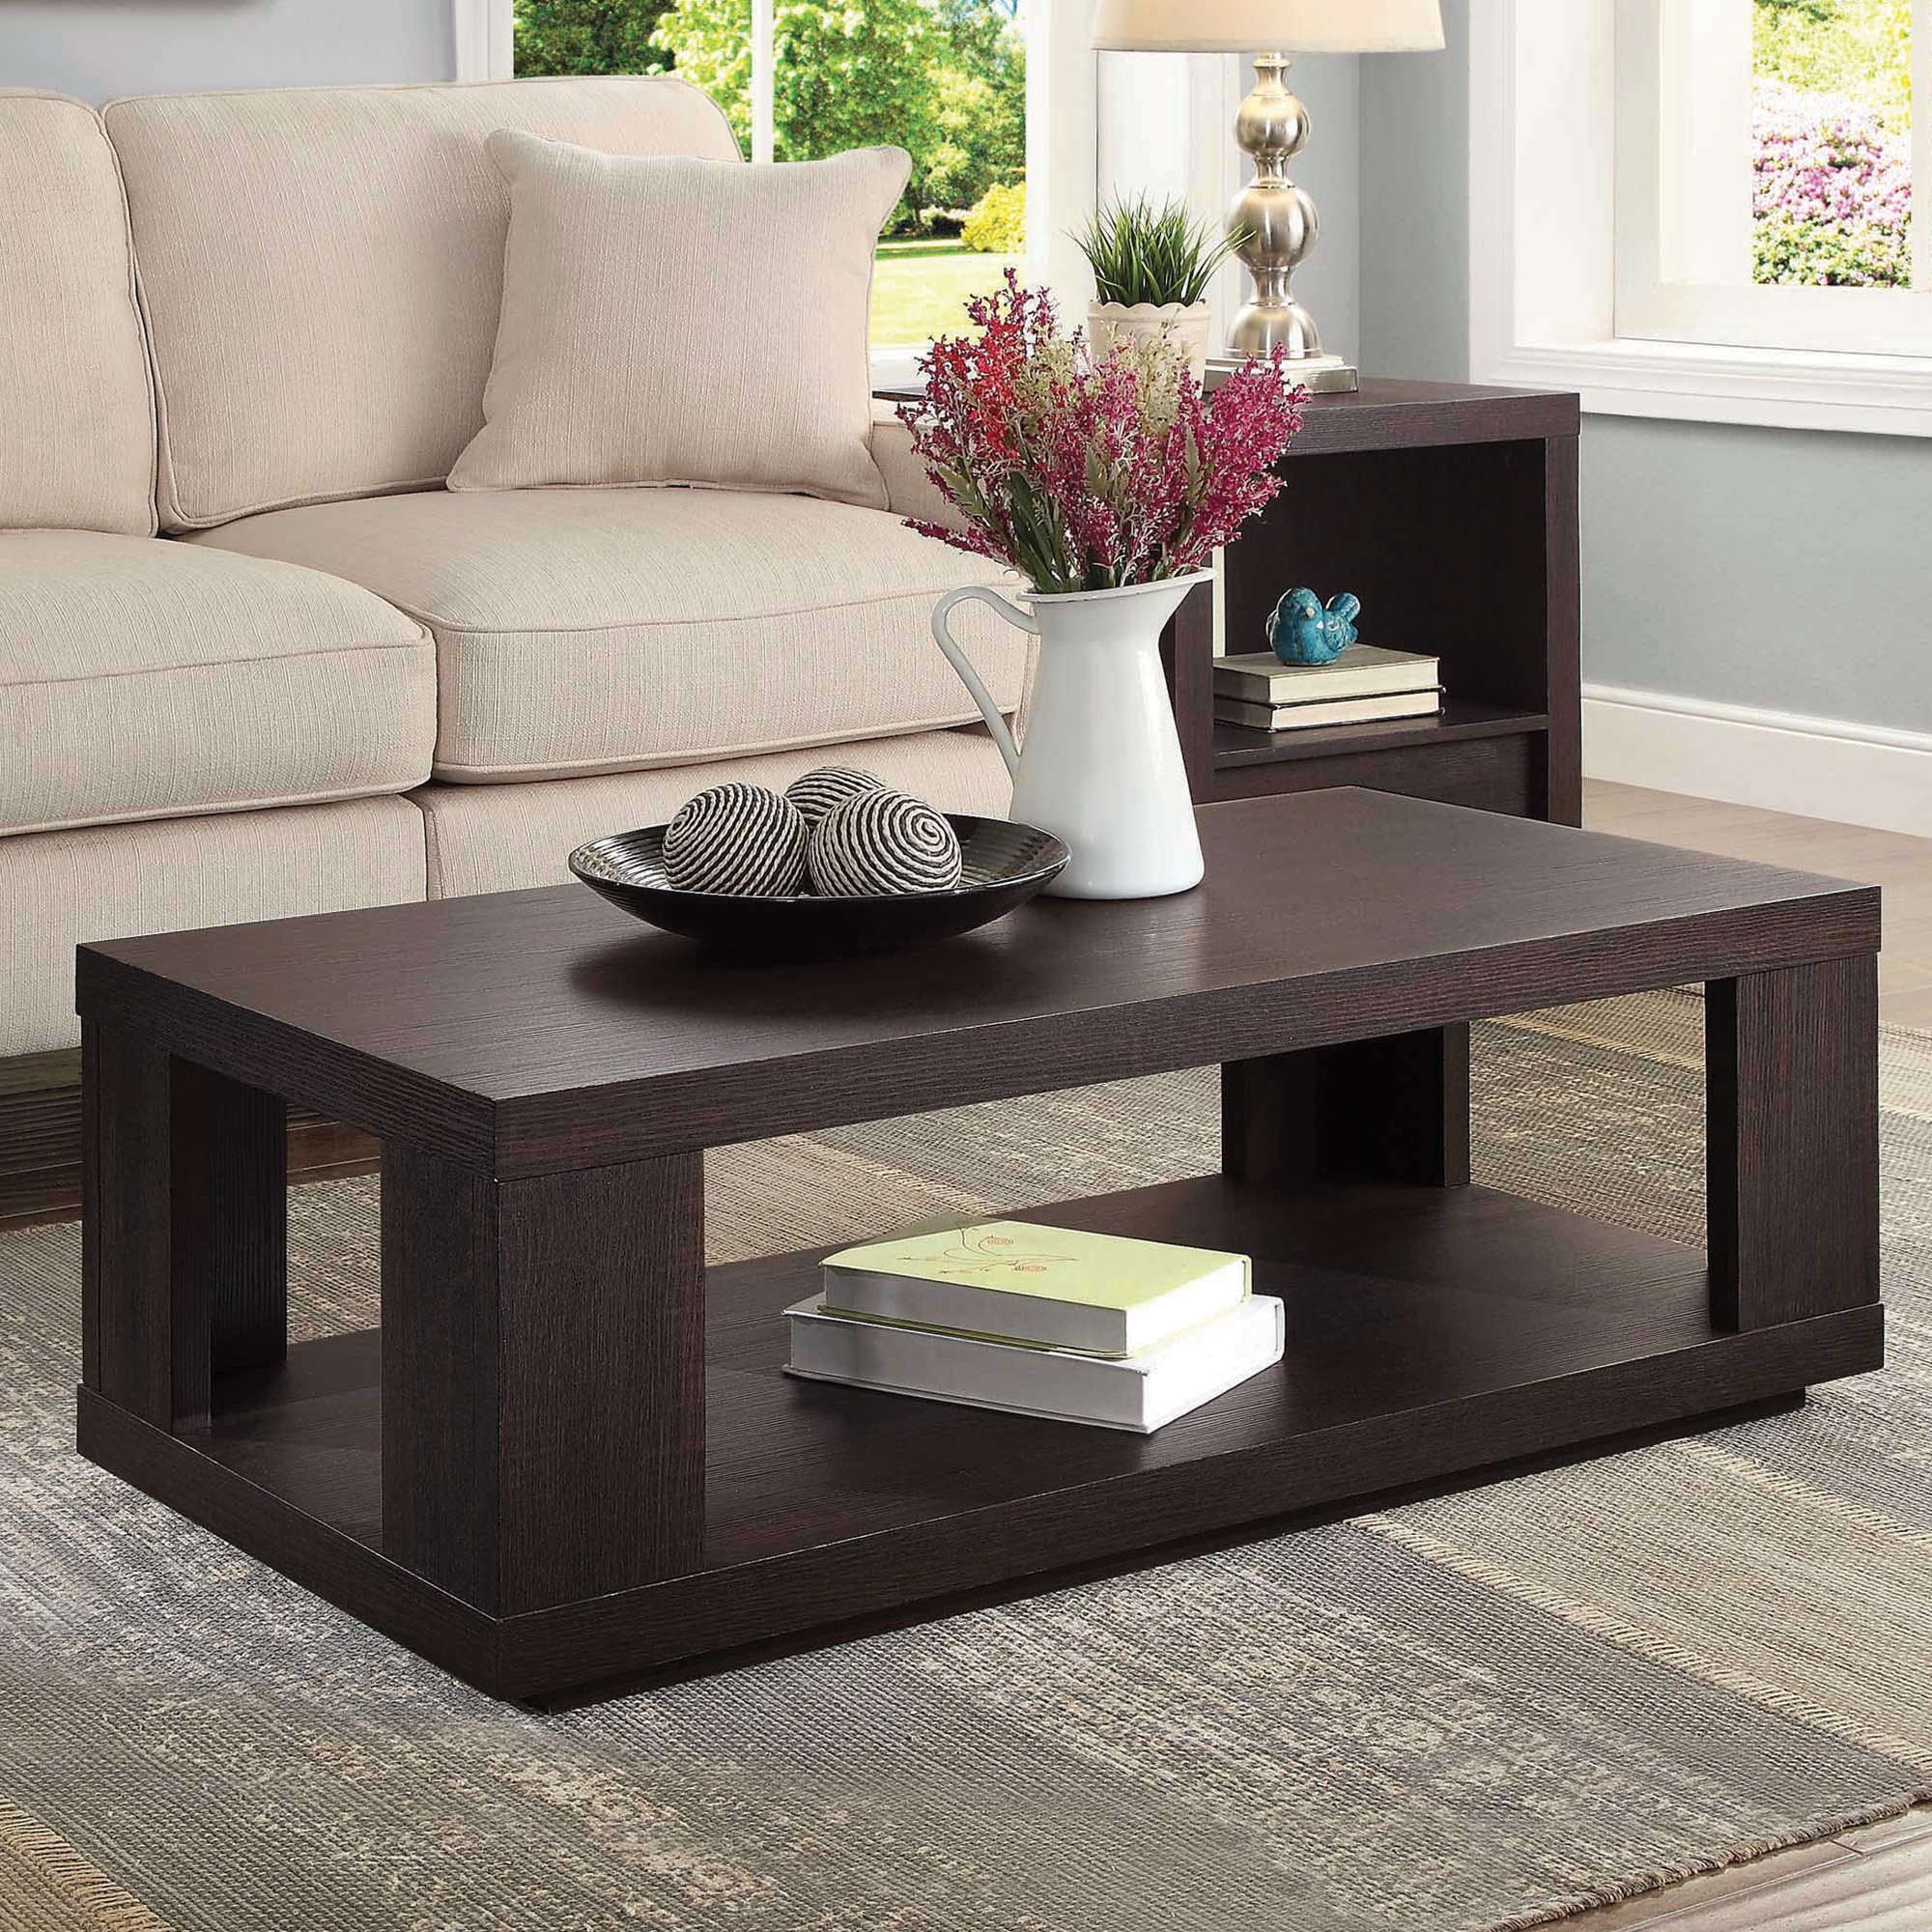 Better Homes & Gardens Steele Coffee Table With India | Ubuy With Espresso Wood Finish Coffee Tables (View 9 of 15)